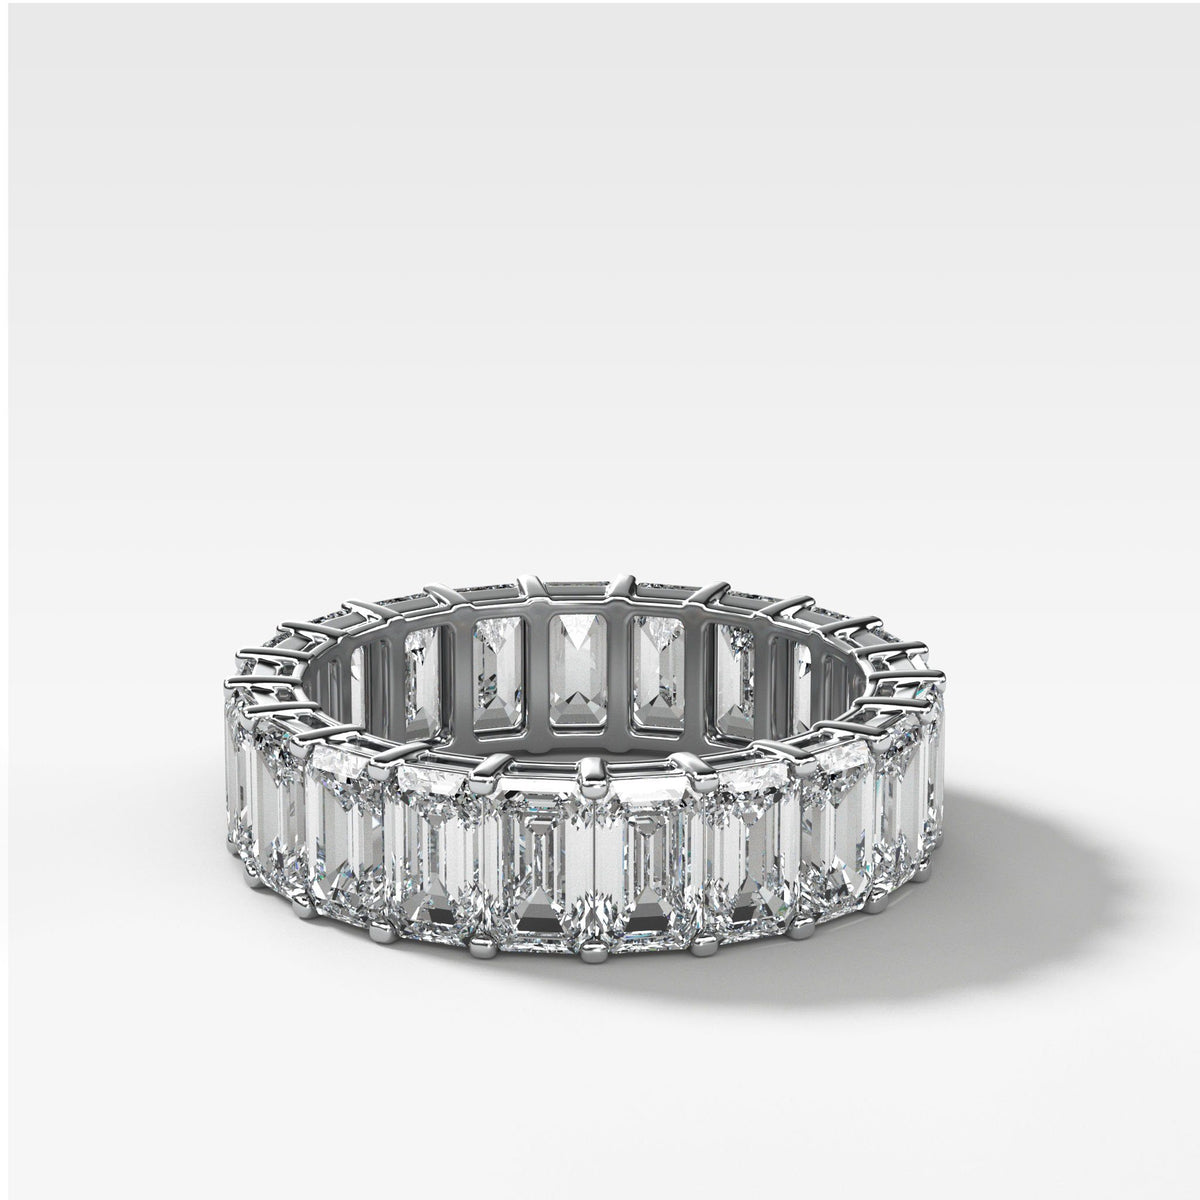 Emerald Cut Constellation Eternity Band available by Good Stone in White Gold